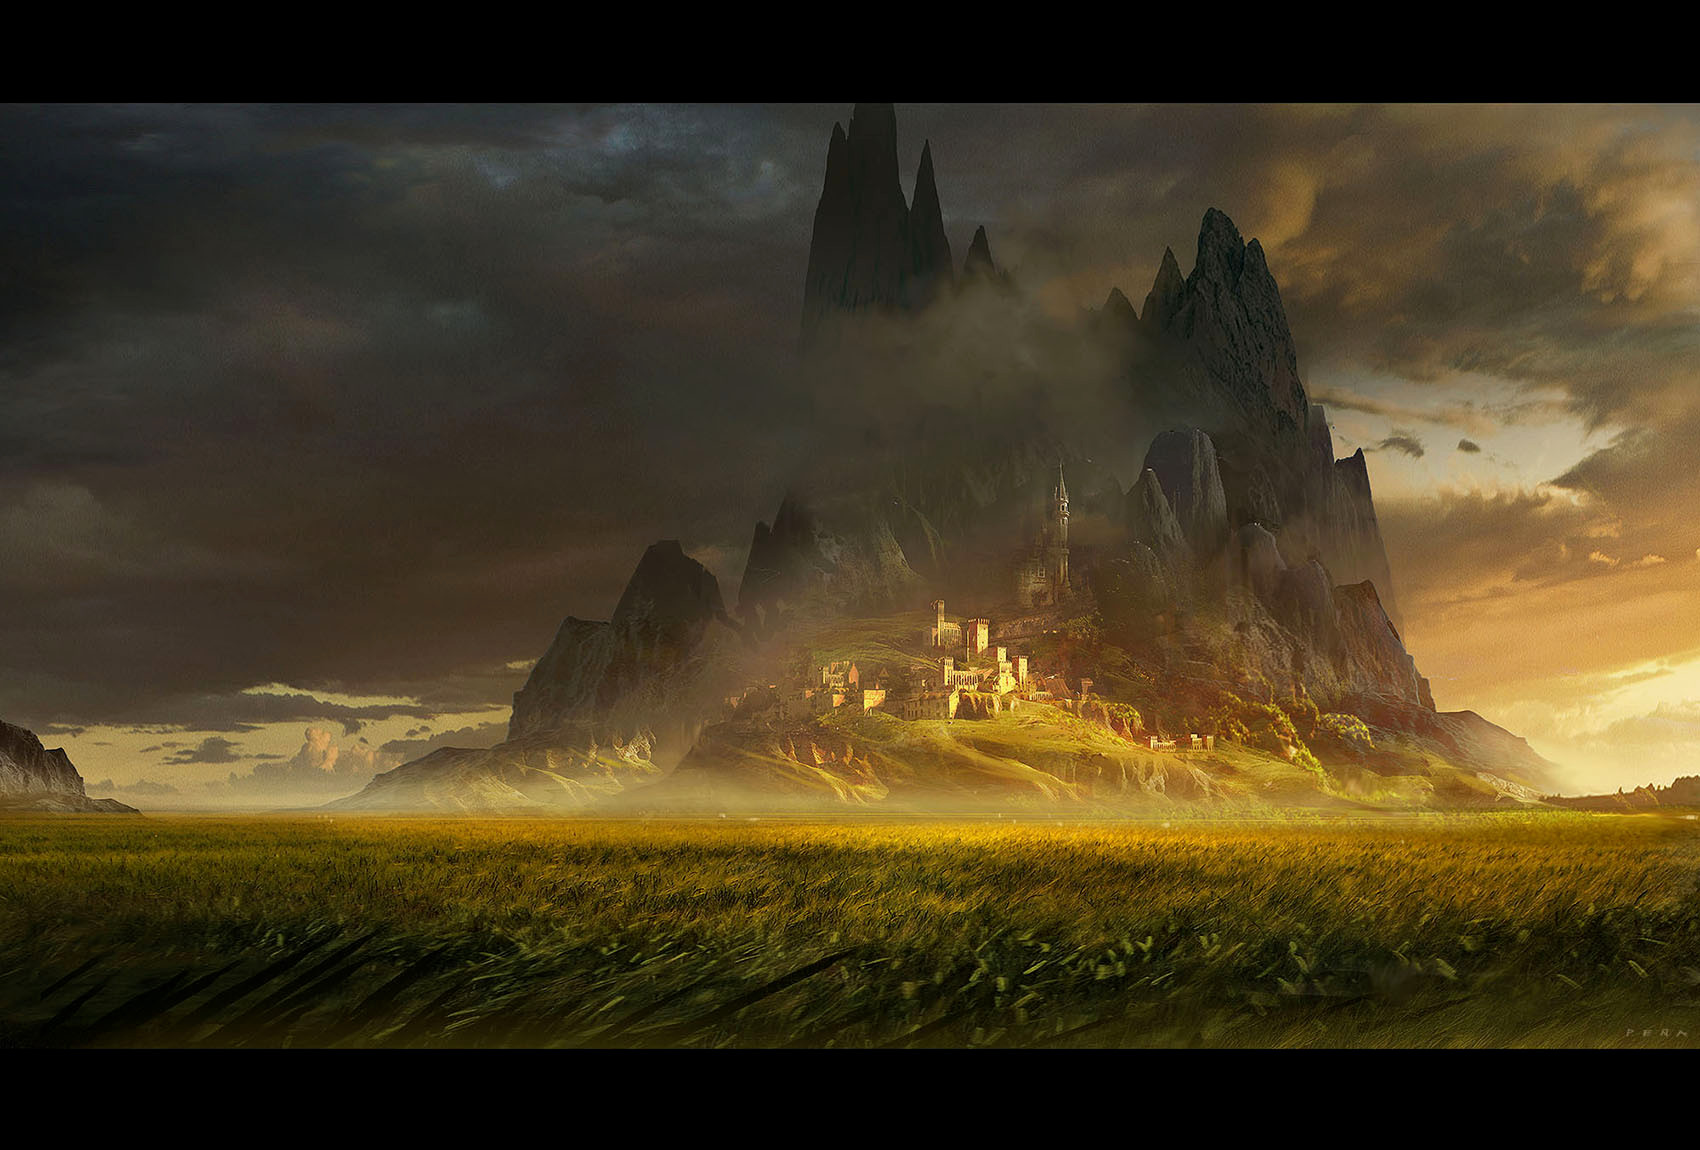 The Fields: a personal art work from Eduardo's IP Wizard Anthologies.